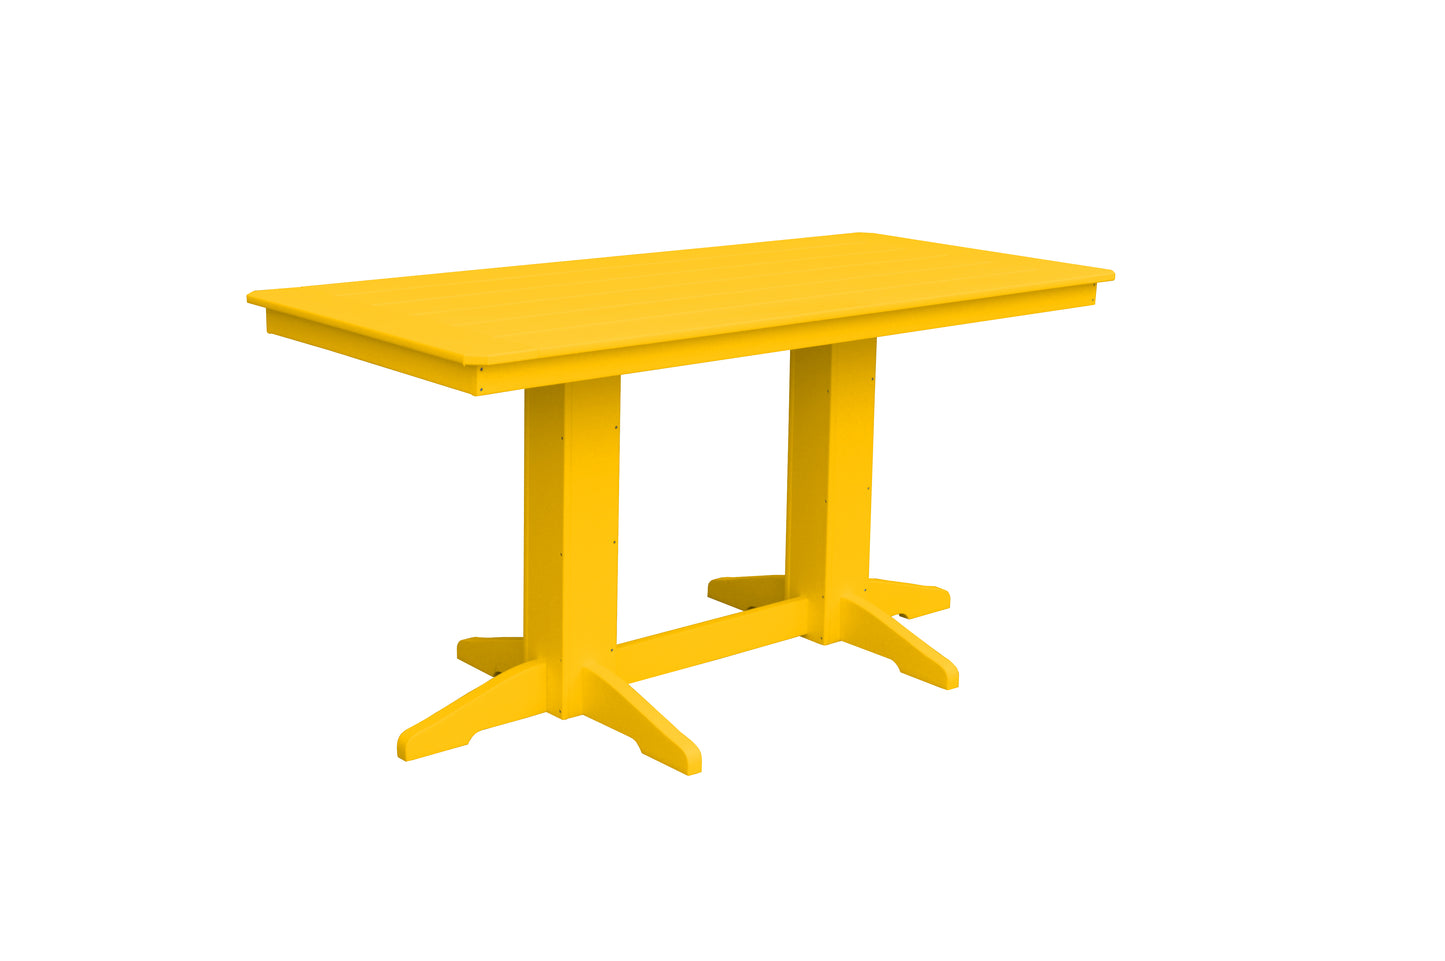 A&L Furniture Co. Recycled Plastic 6' Rectangular Table (Counter Height) - LEAD TIME TO SHIP 10 BUSINESS DAYS